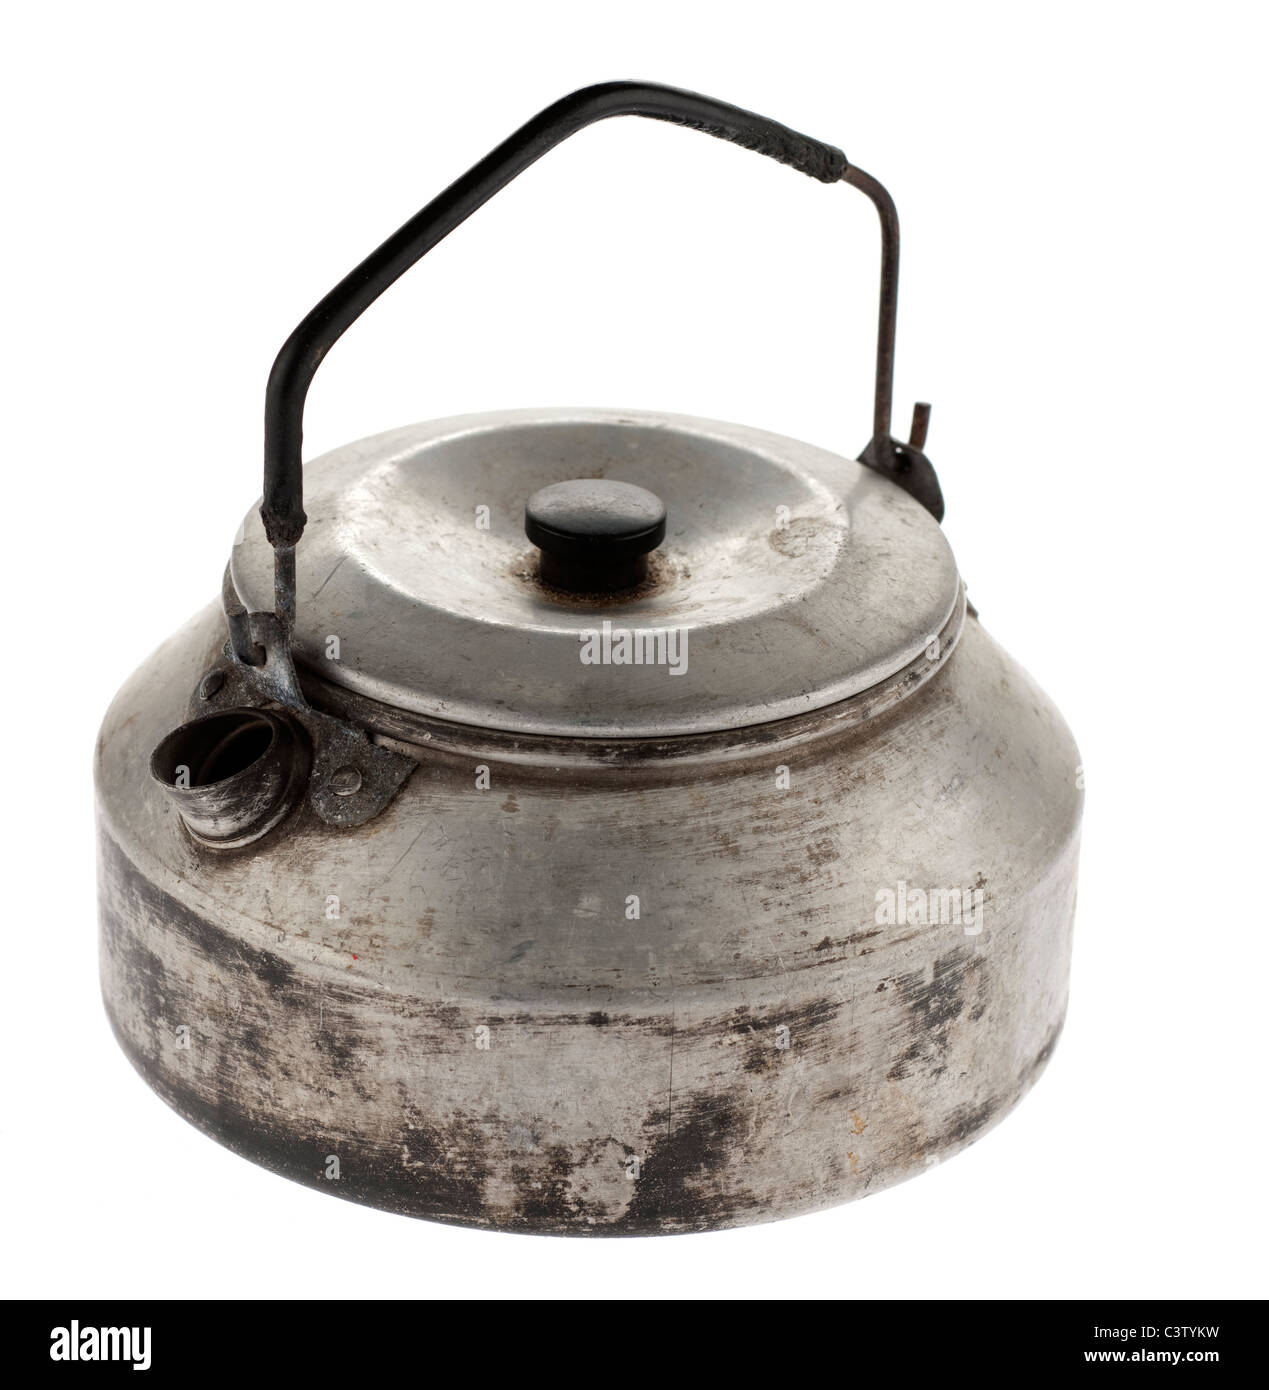 https://c8.alamy.com/comp/C3TYKW/old-used-metal-camping-kettle-with-plastic-coated-handle-C3TYKW.jpg